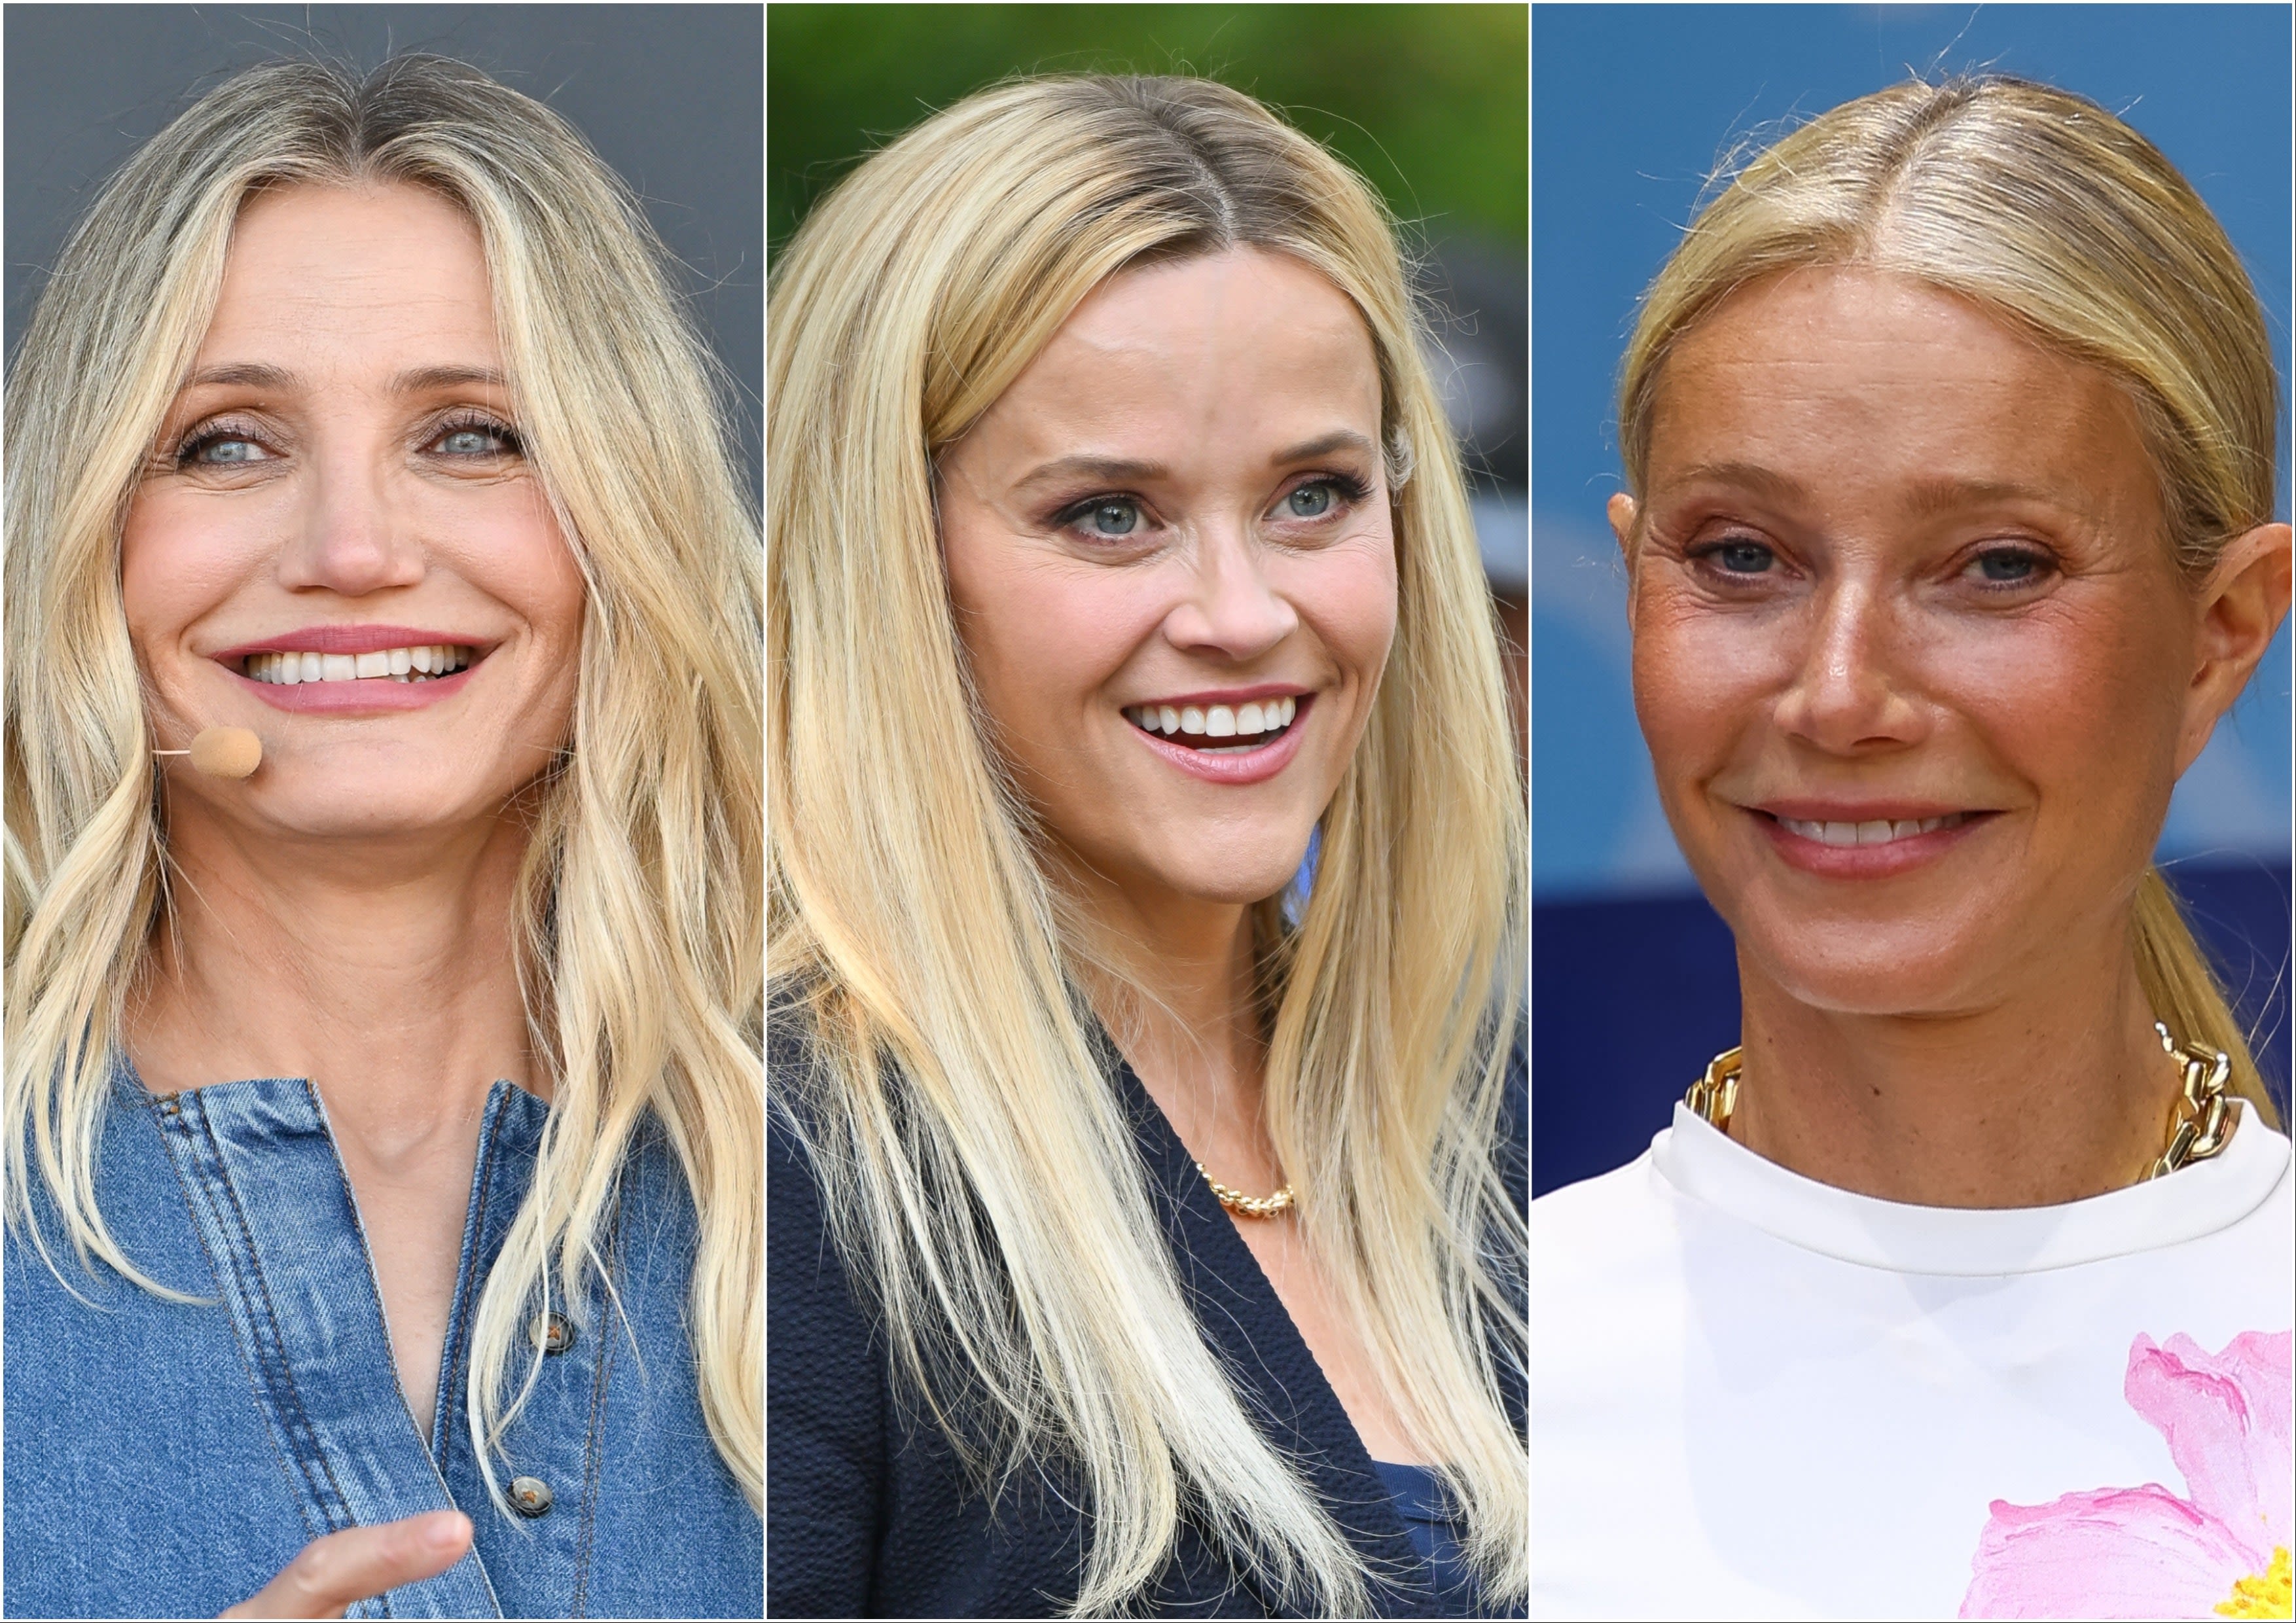 Gwyneth Paltrow, Cameron Diaz, and Reese Witherspoon Had a Meeting of the ’00s-Era Rom-Com Blondes